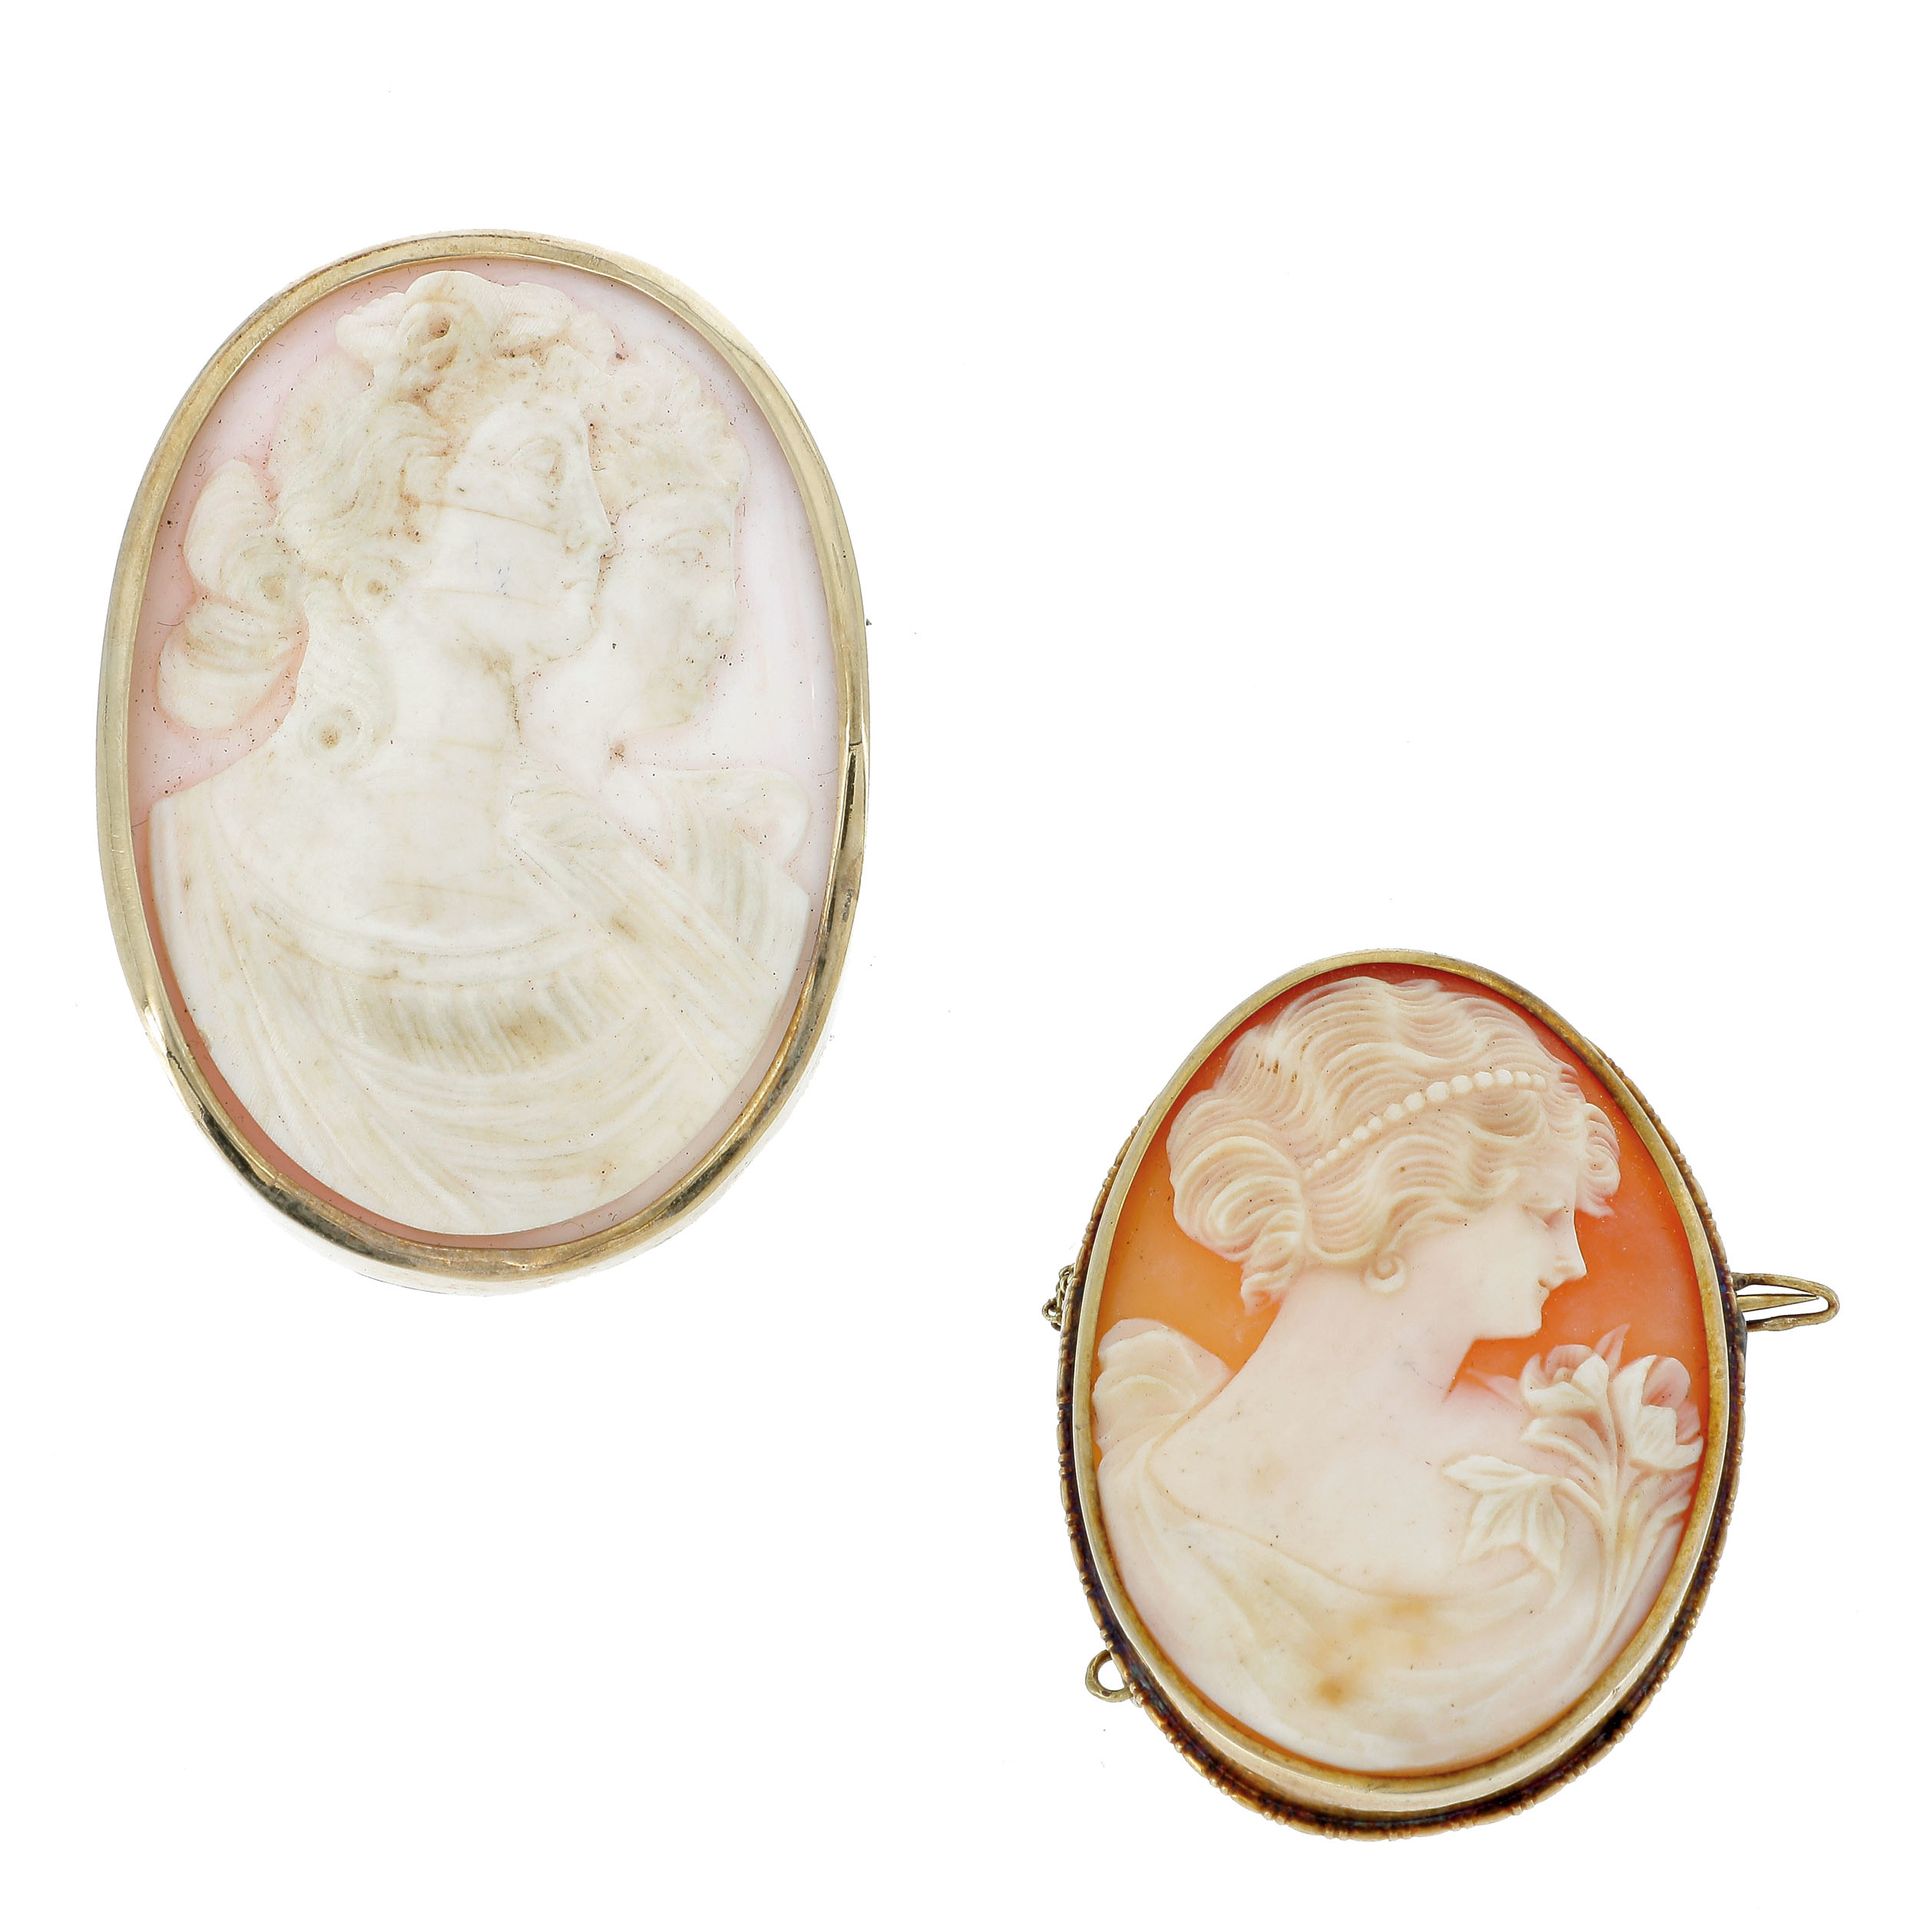 Null SET

Two cameo brooches representing female profiles on a yellow gold setti&hellip;